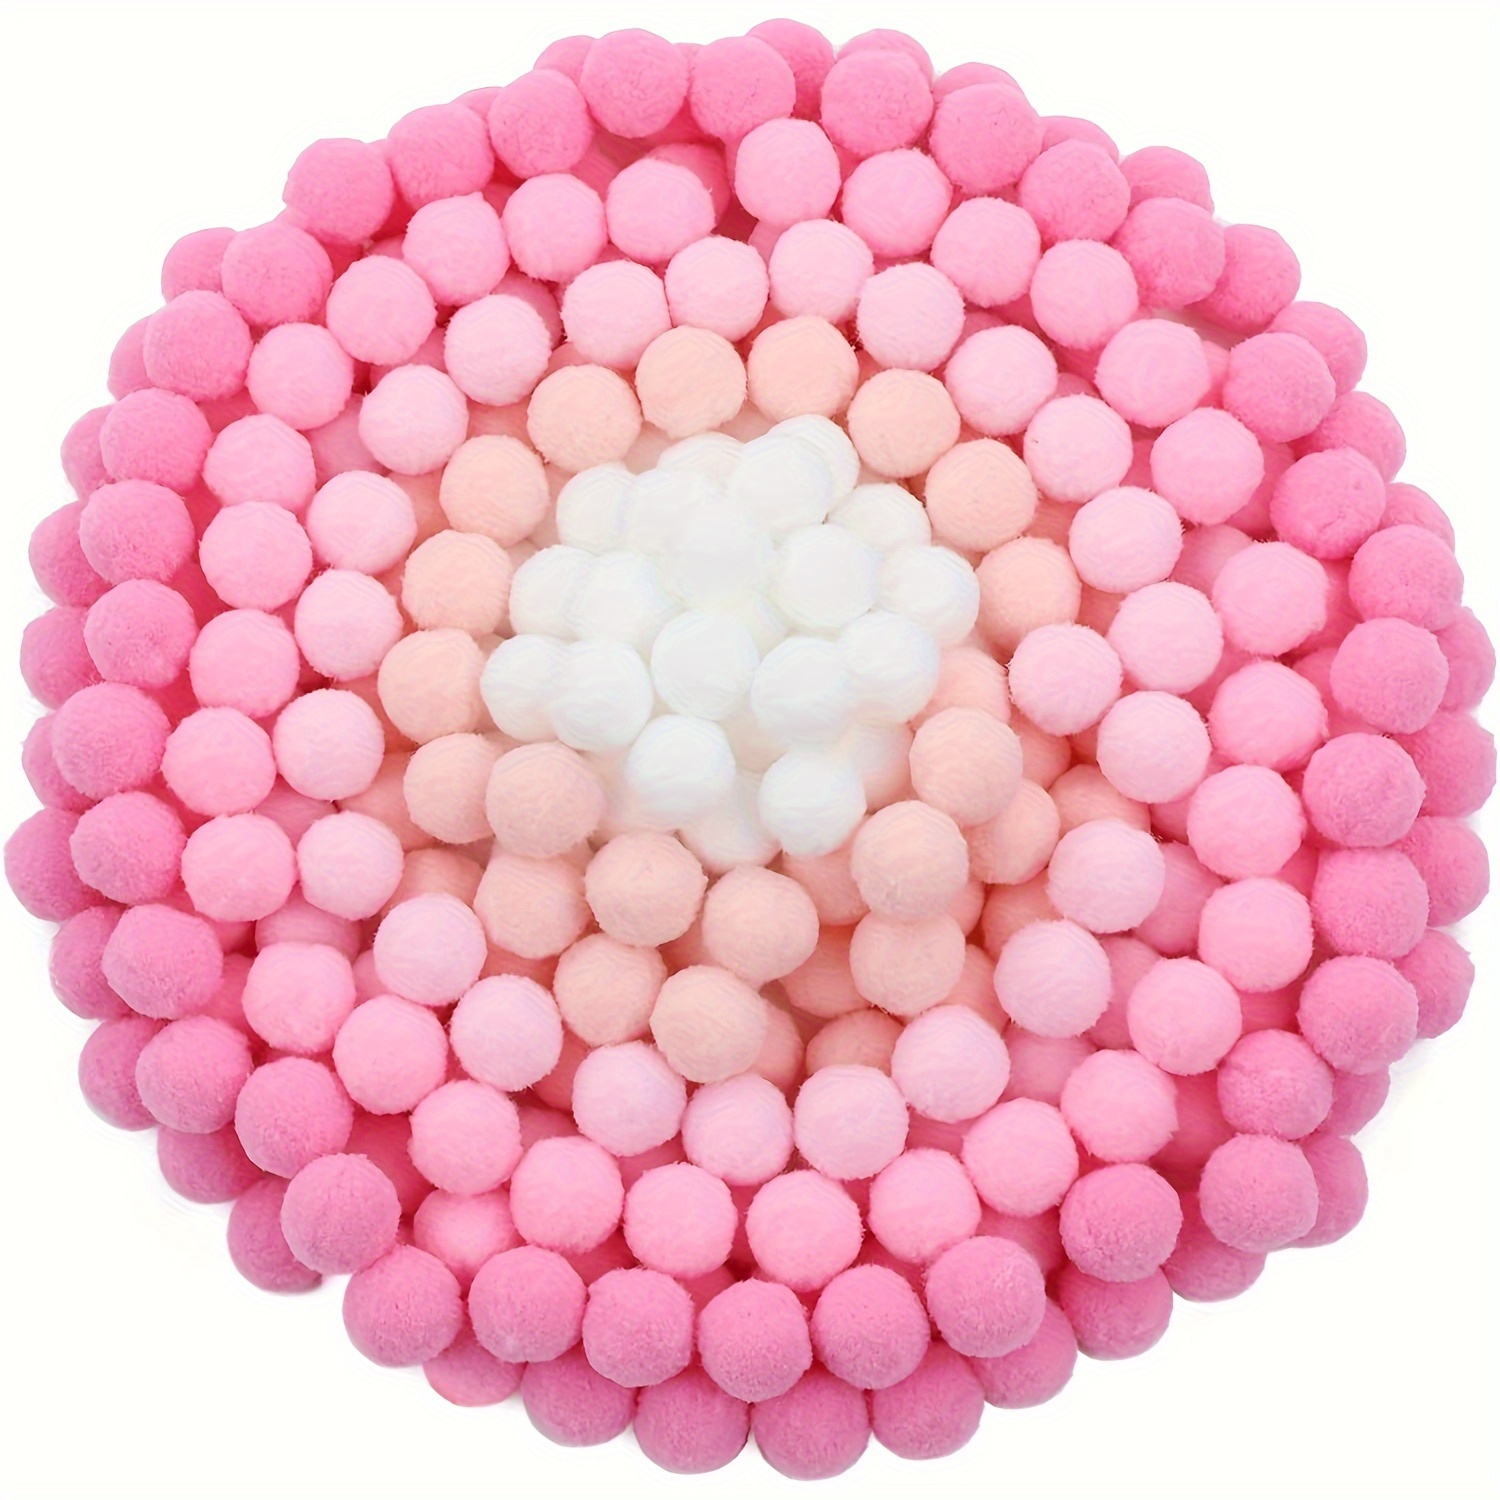  Caydo 500PCS Red Pom Poms, 1cm Small Pom Poms Balls for Kids  DIY Art Creative Crafts Projects and Decorations : Arts, Crafts & Sewing